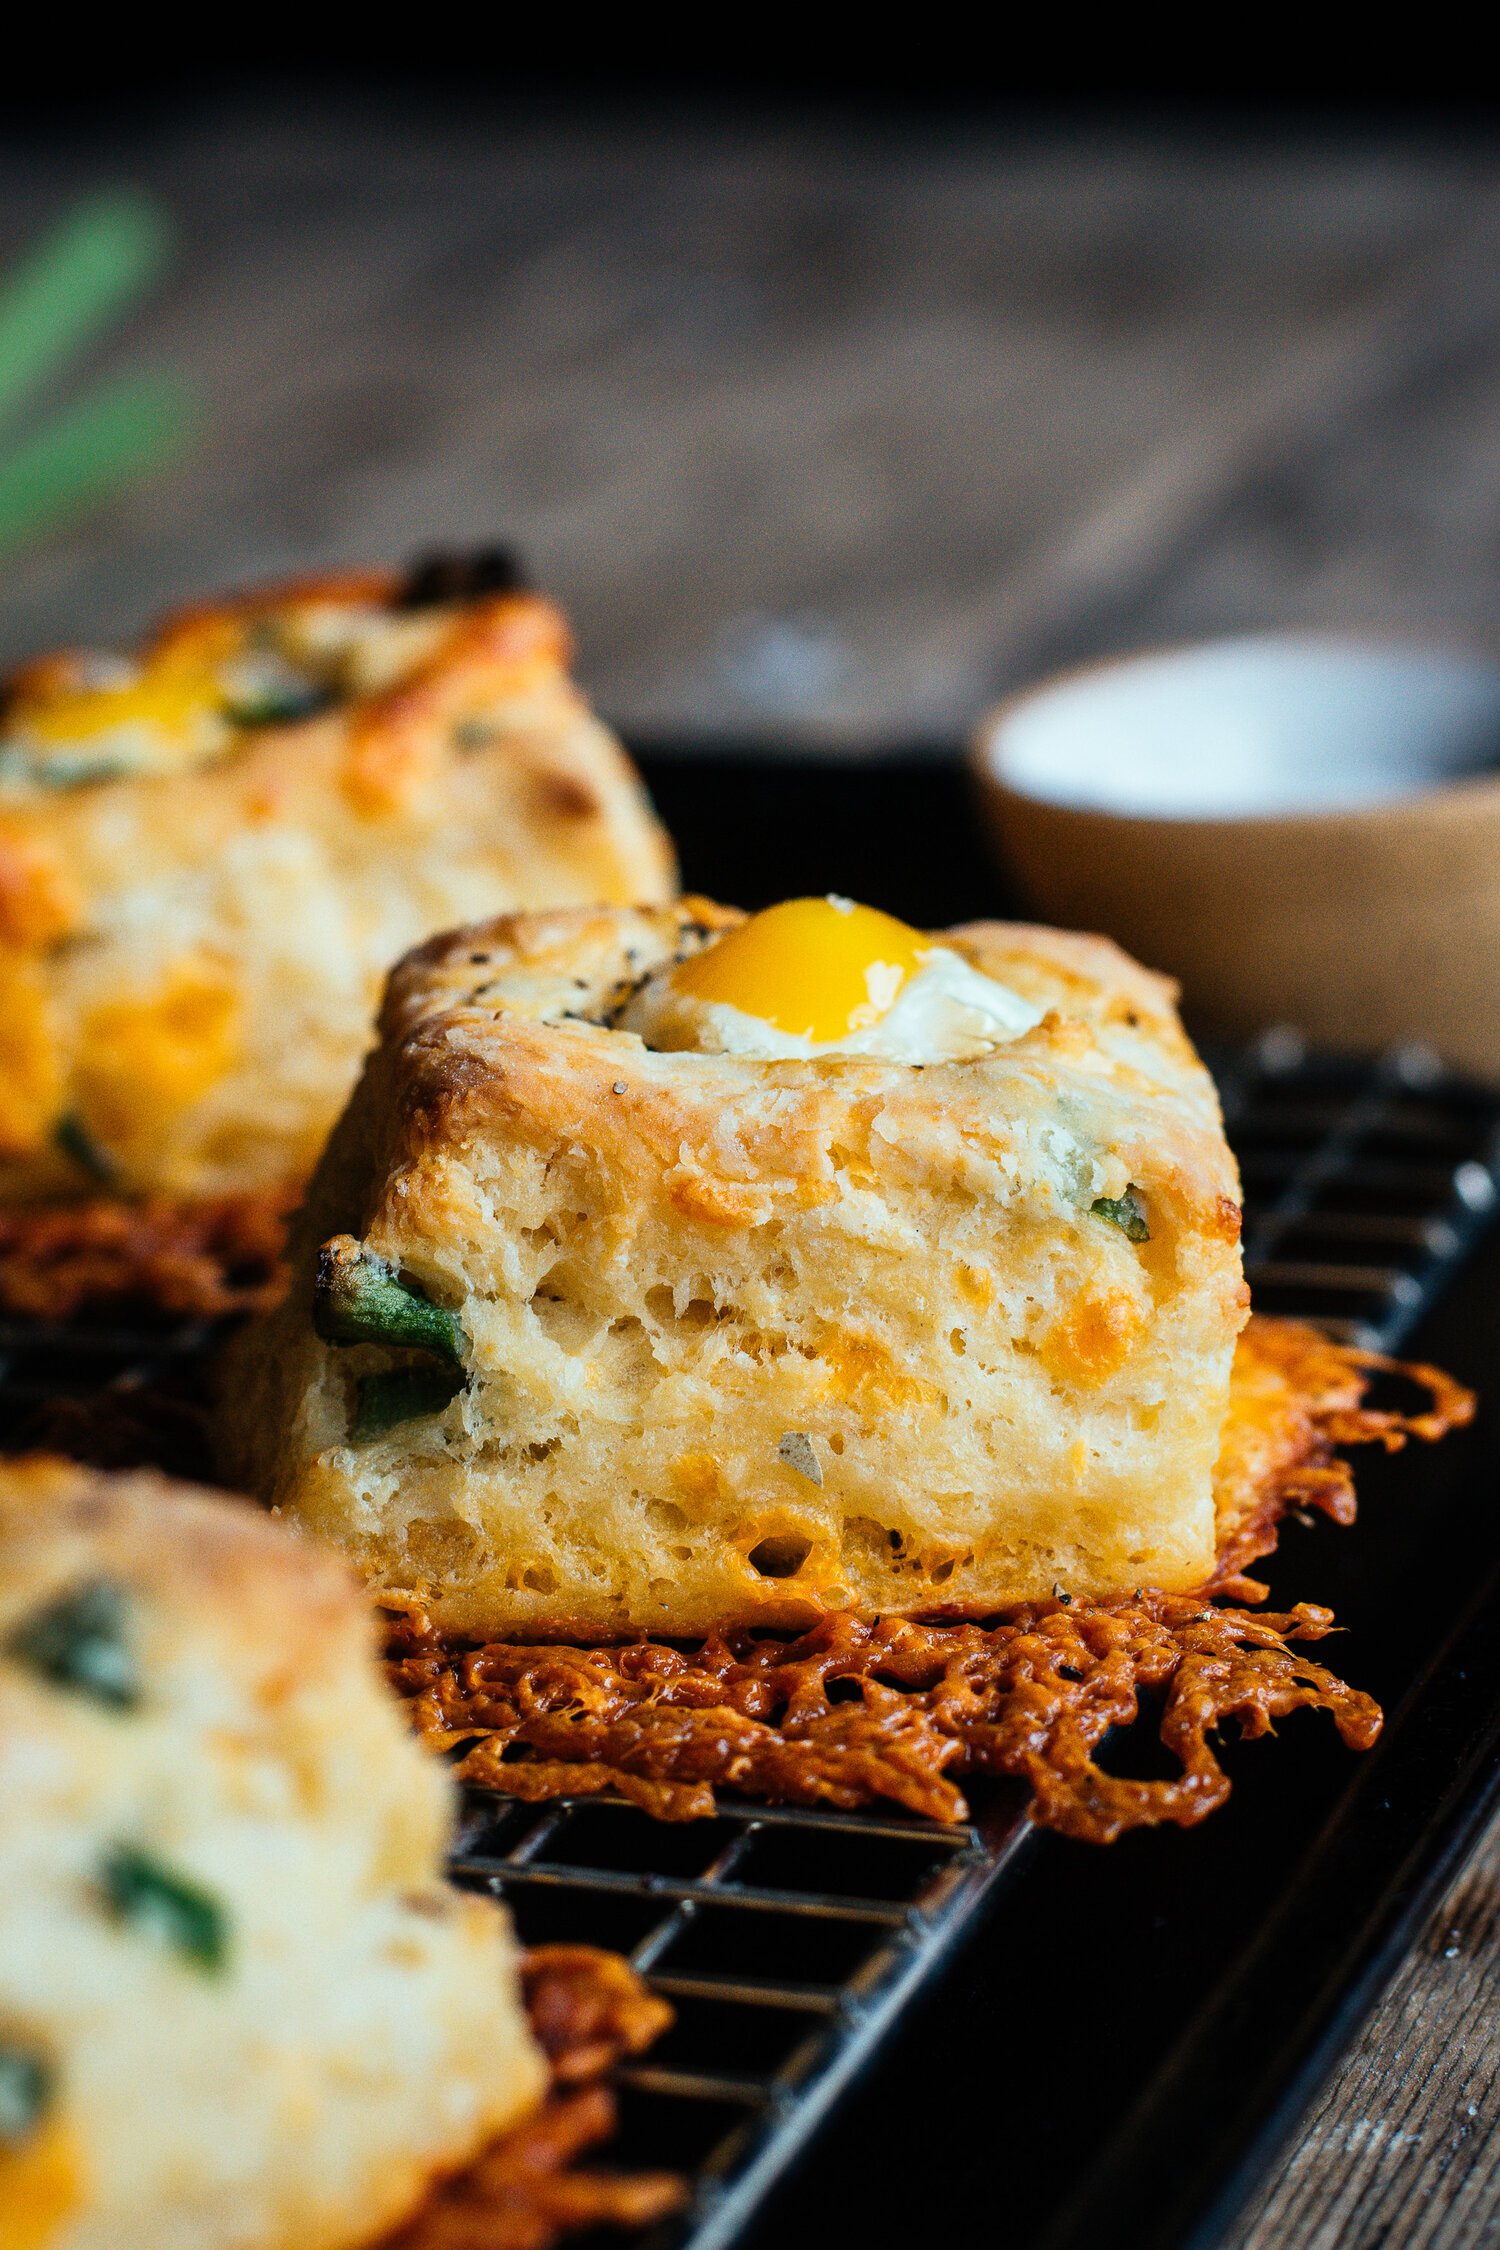 Quail Egg, Cheddar, and Green Onion Biscuits